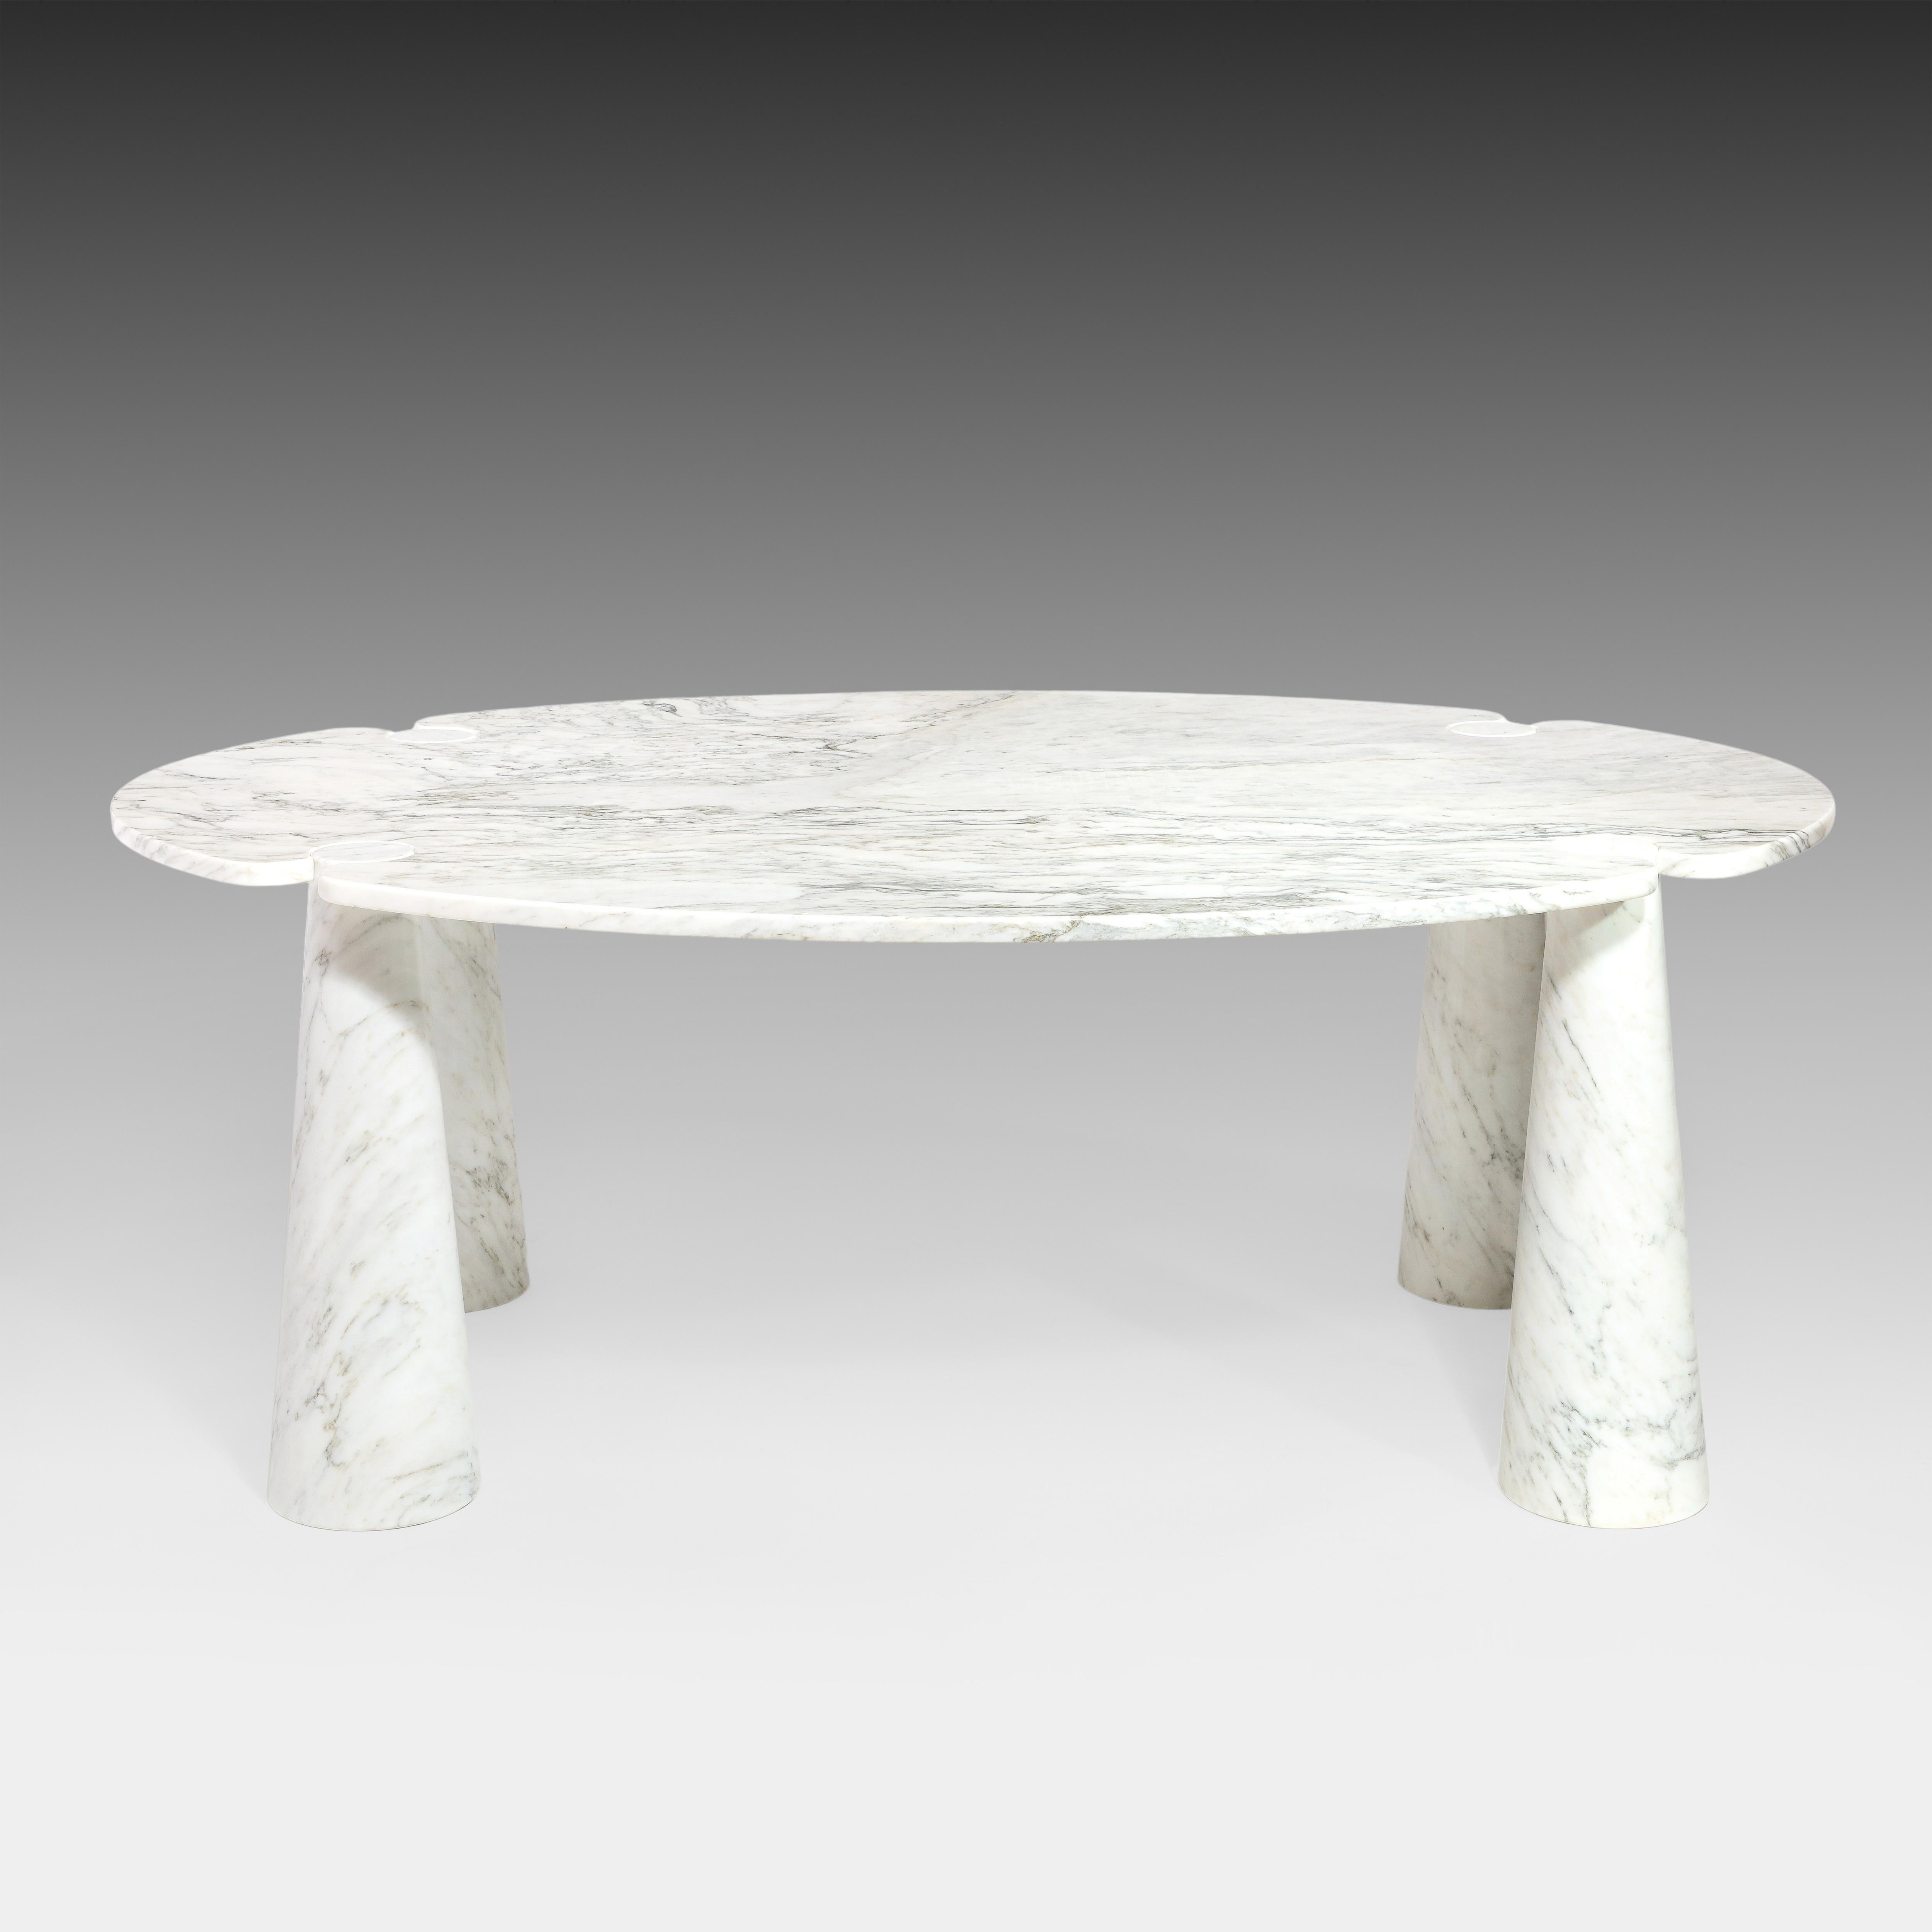 Angelo Mangiarotti for Skipper Carrara Marble Dining Table from Eros Series 1971 For Sale